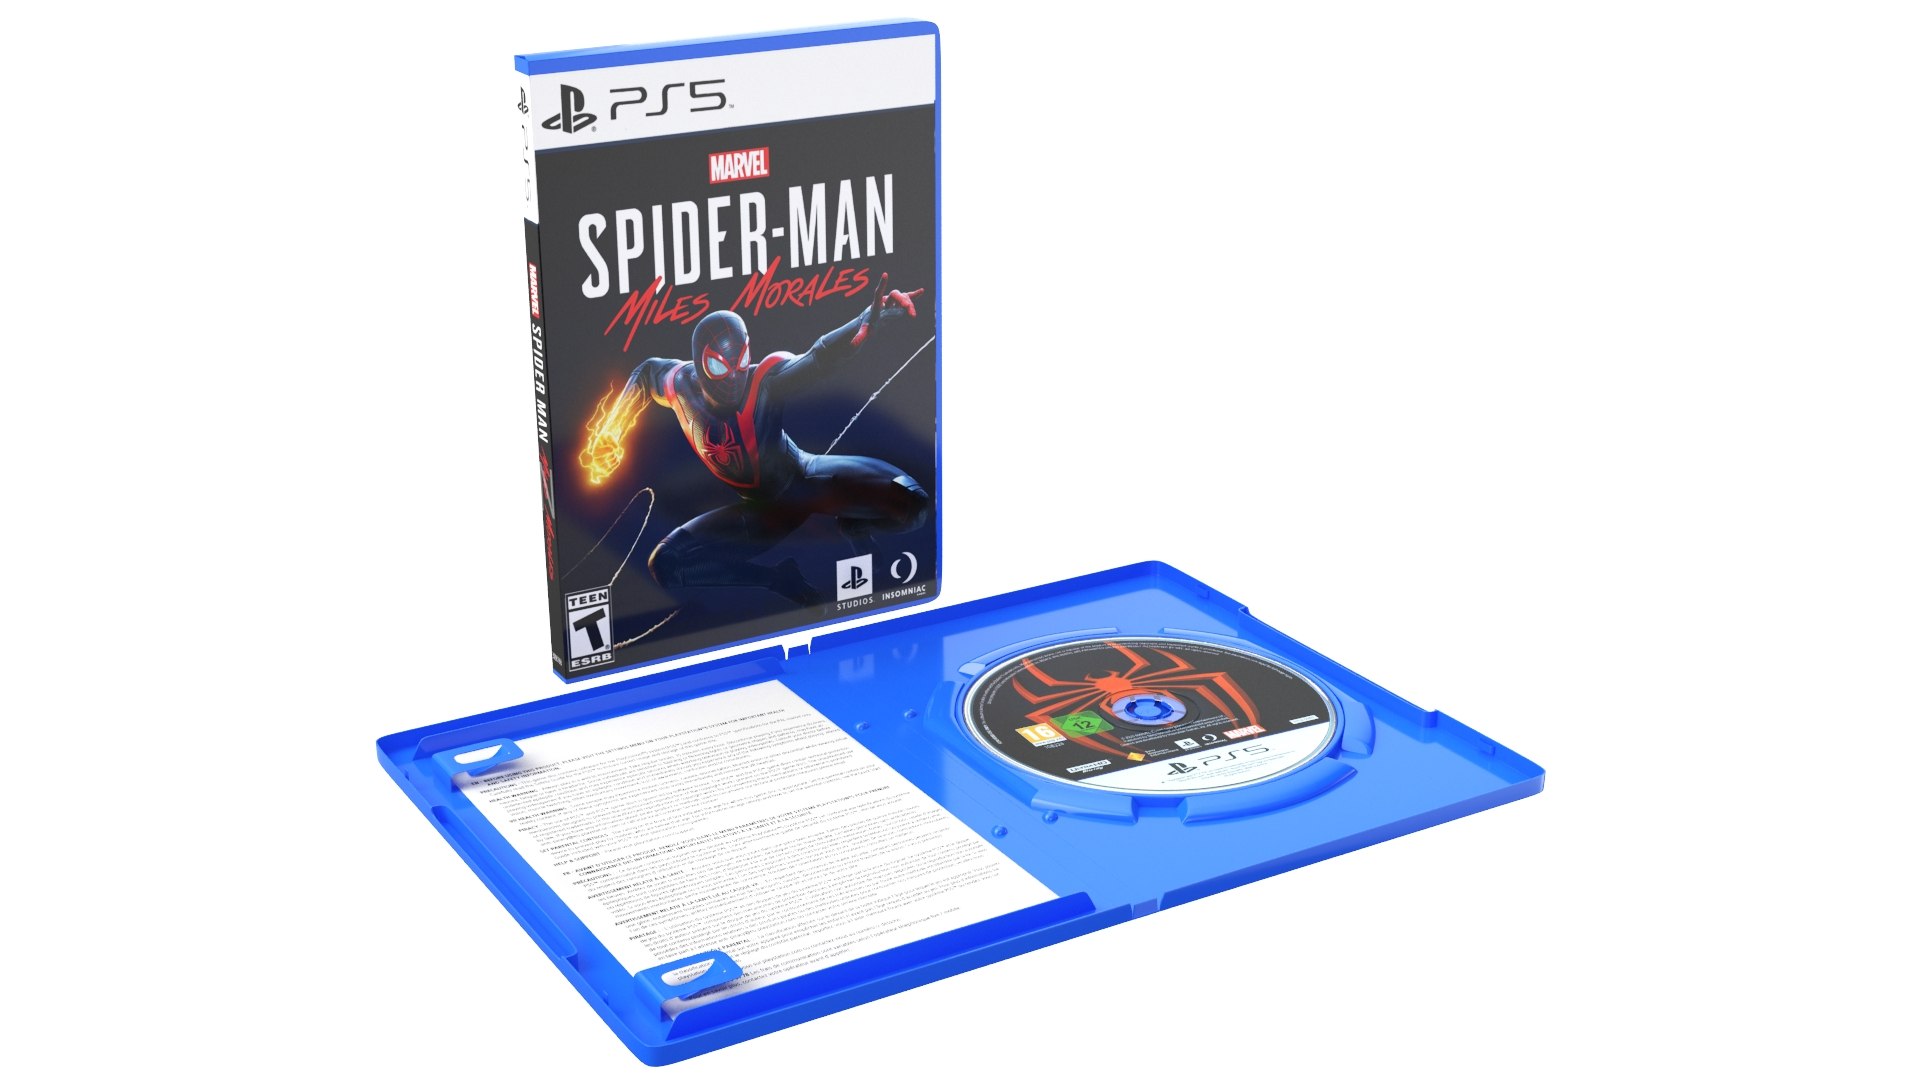 Play Station 4 Pro Spider-Man Limited Edition price in Bangladesh